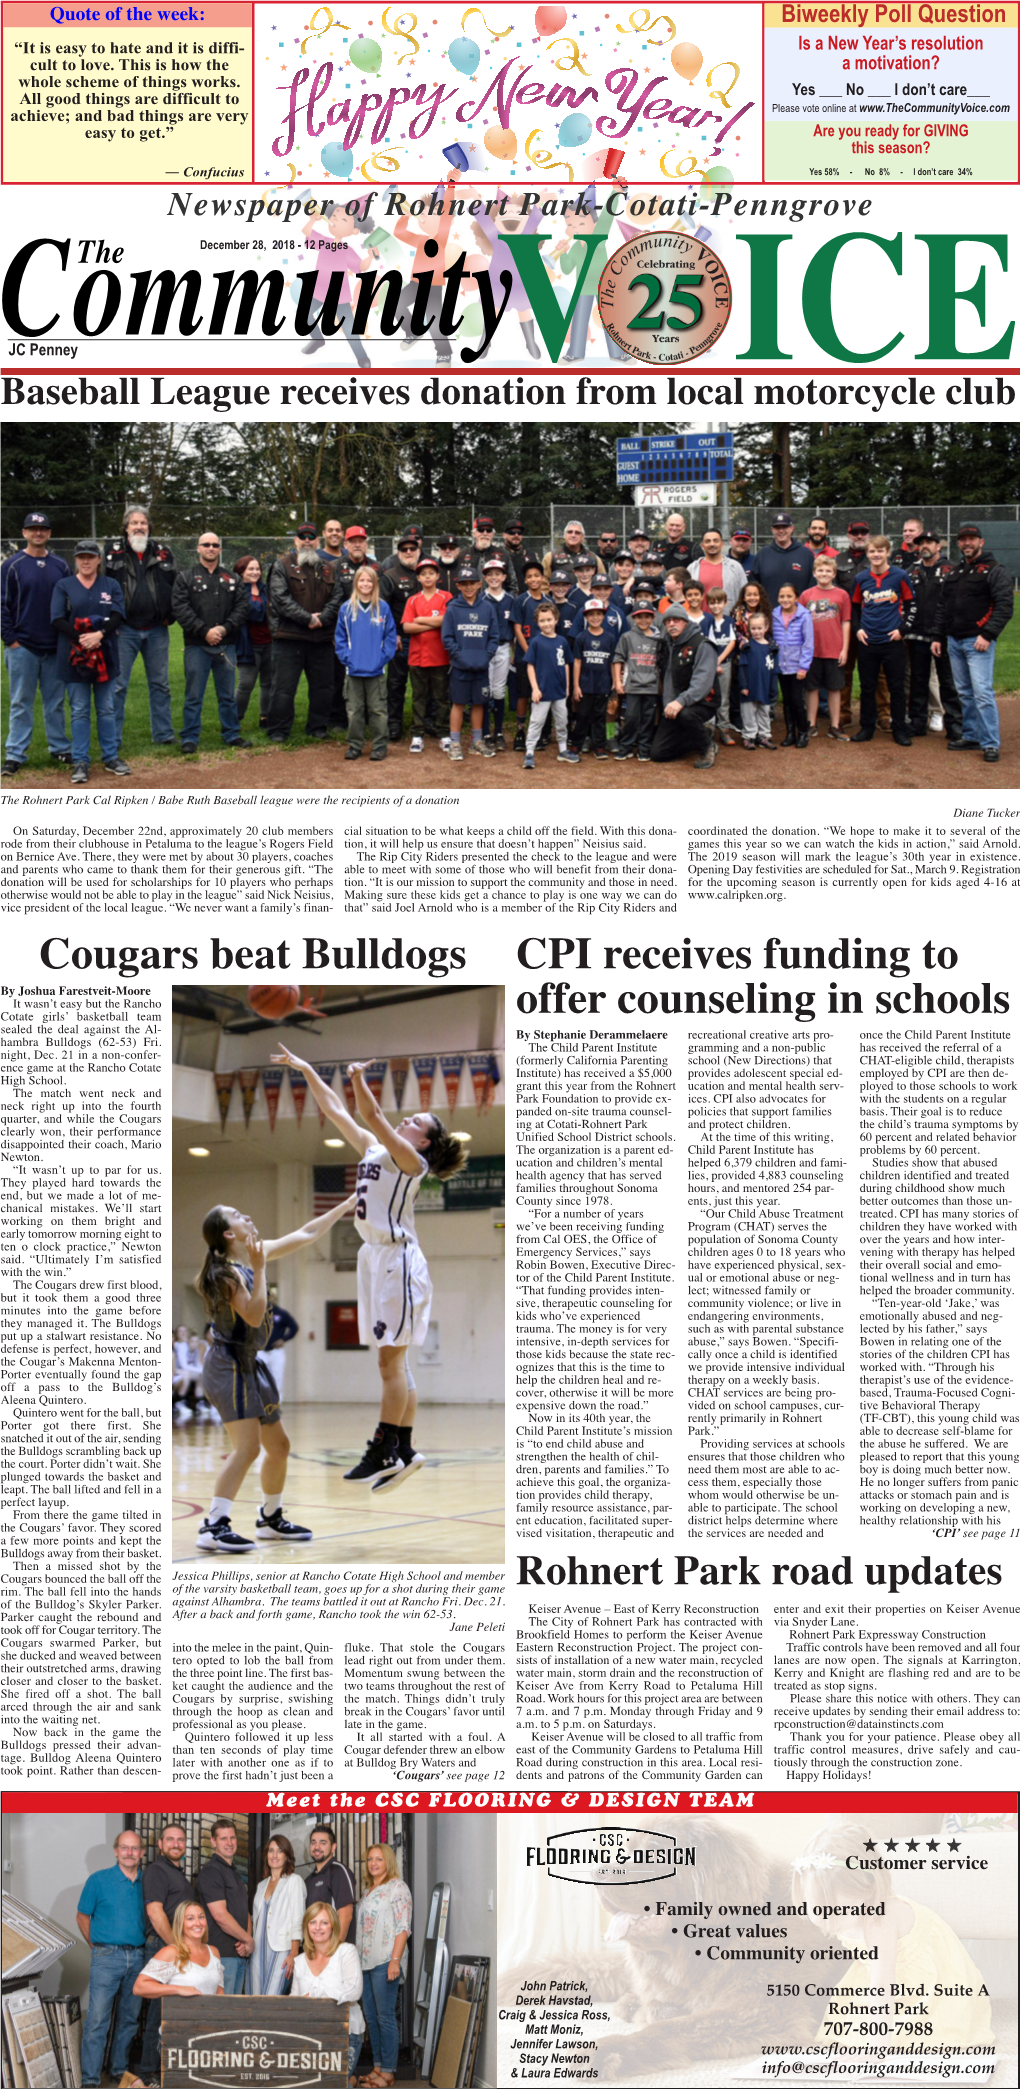 Cougars Beat Bulldogs CPI Receives Funding to Offer Counseling in Schools